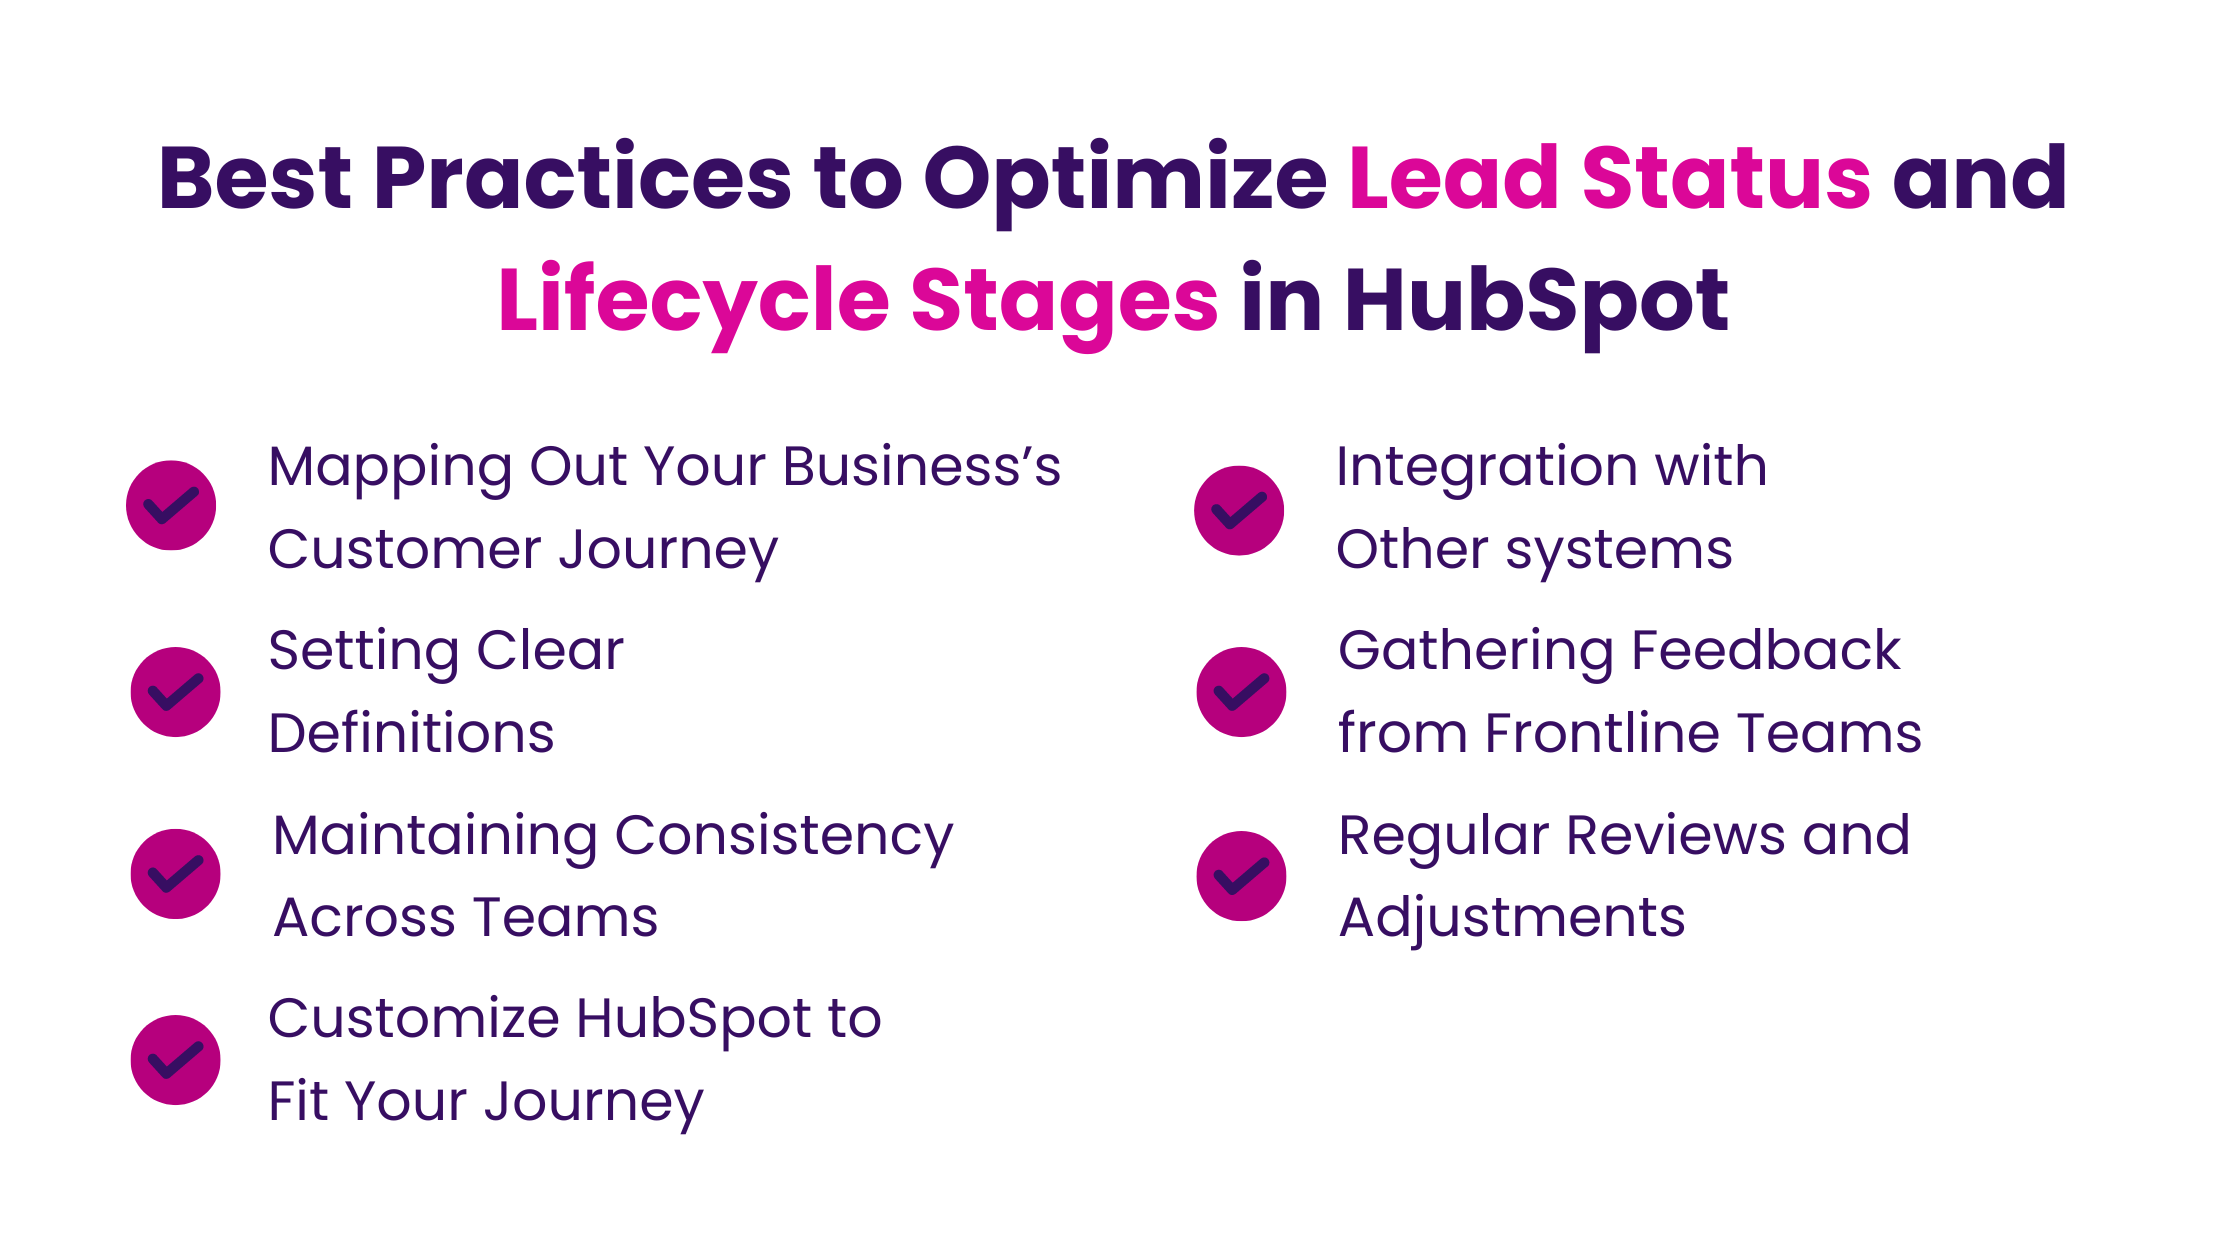 Best Practices to Optimize Lead Status and Lifecycle Stages in HubSpot